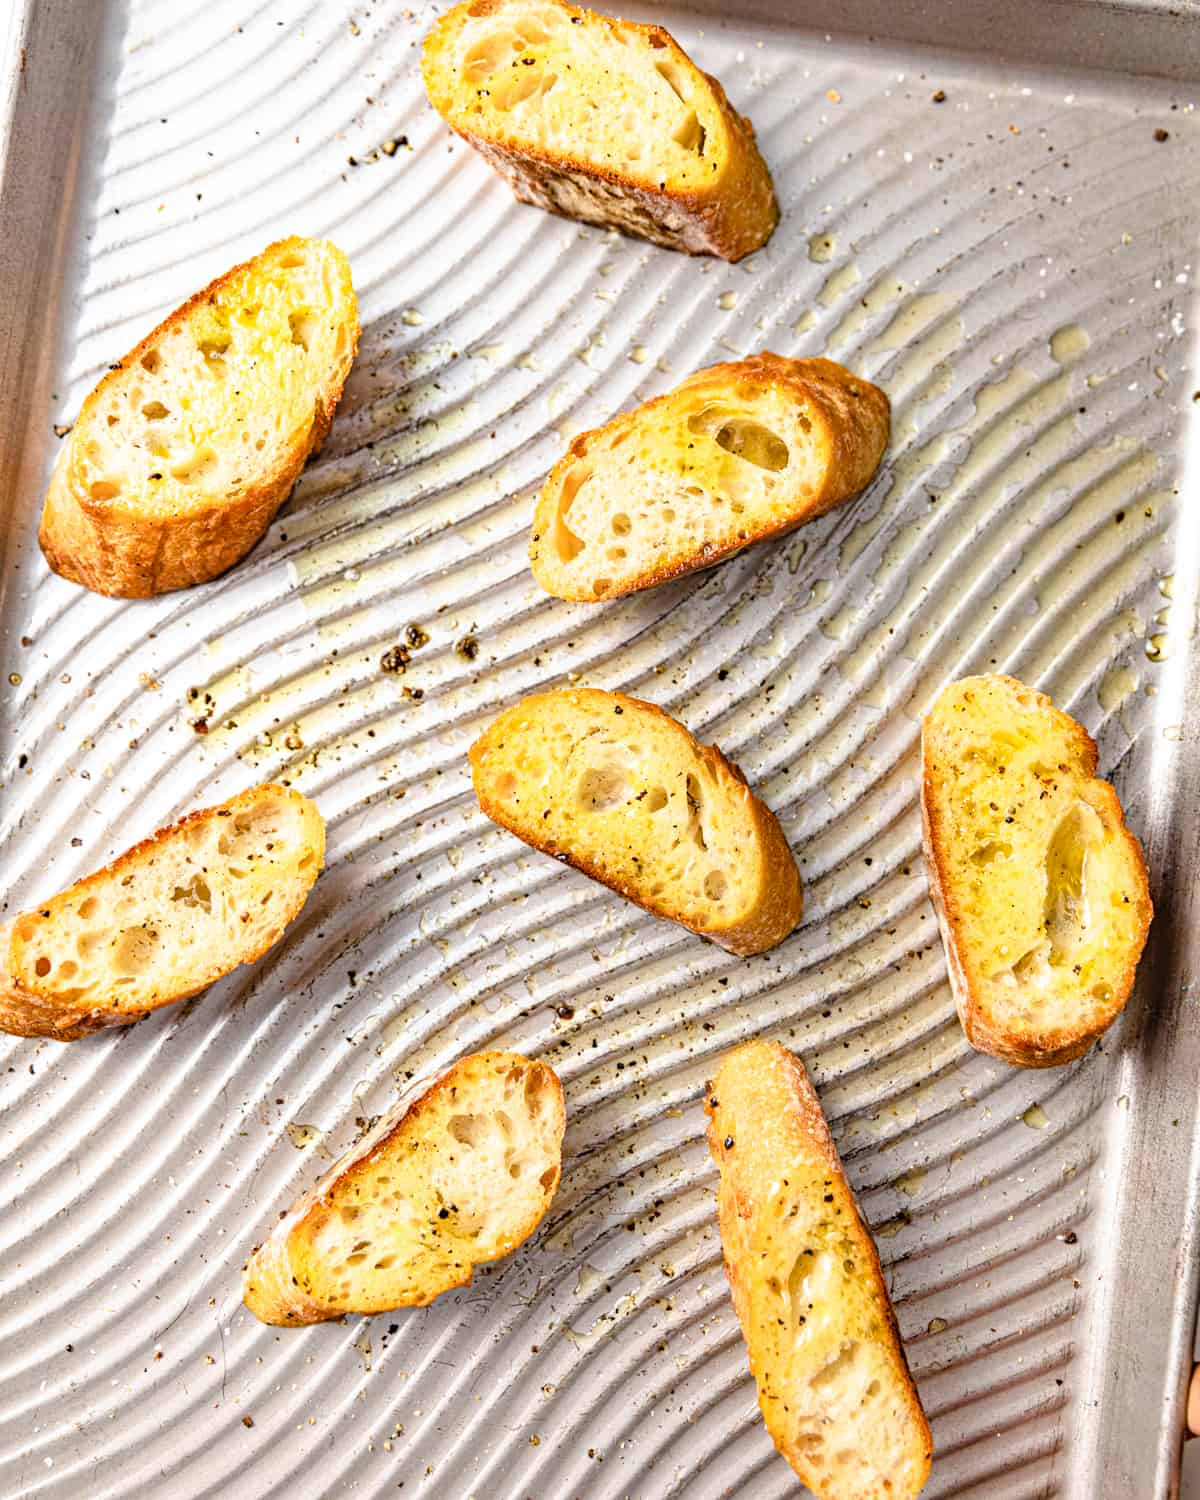 sliced bread on a baking sheet topped with olive oil, salt, and pepper.